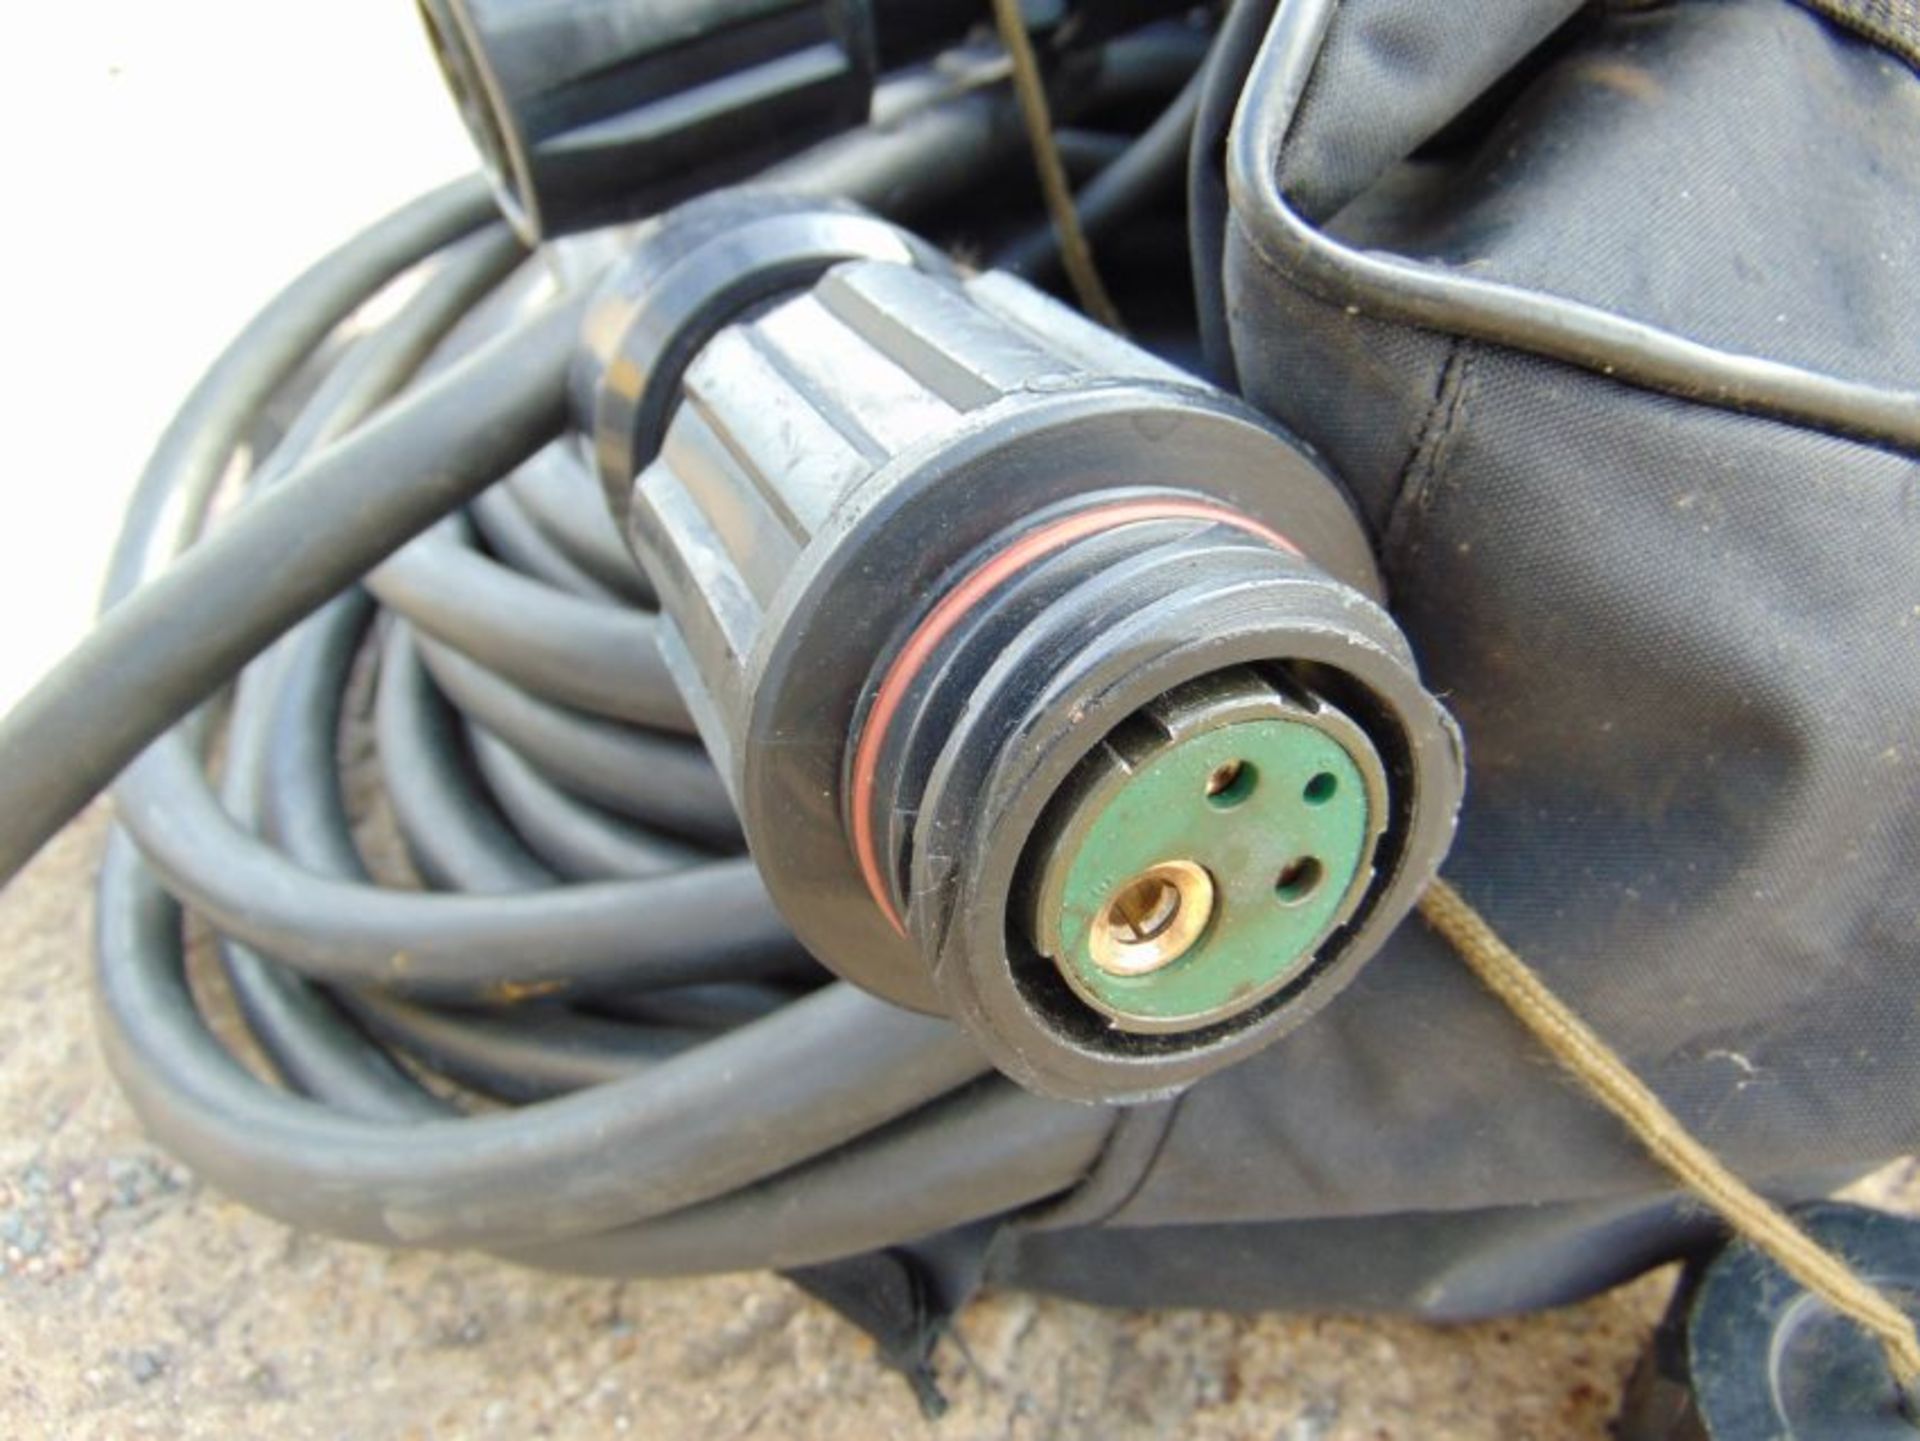 Unissued G3 Systems Portable Office Power Cable Assy - Image 2 of 6